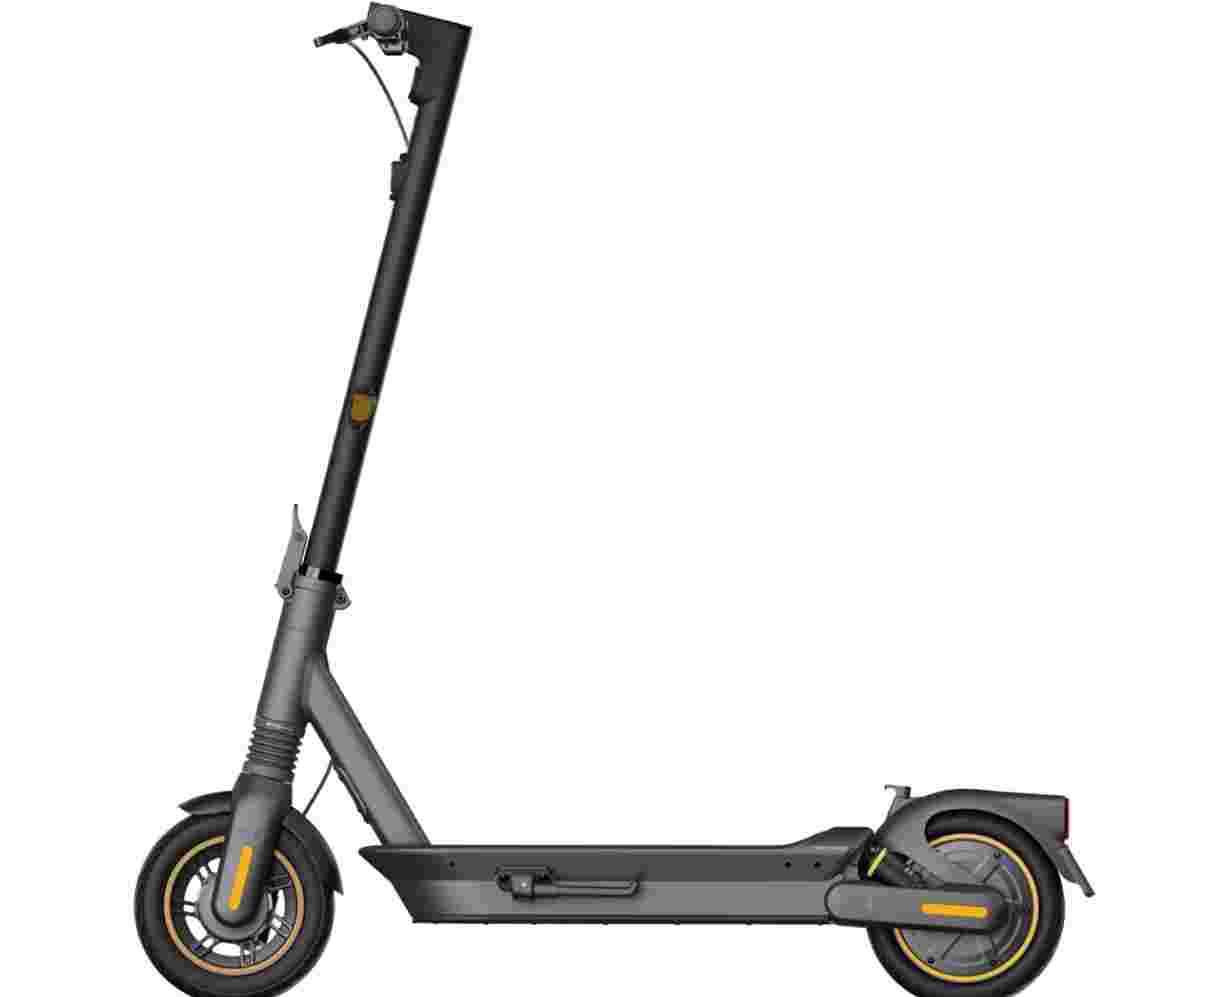 Segway Ninebot Max G2: The best electric scooter overall